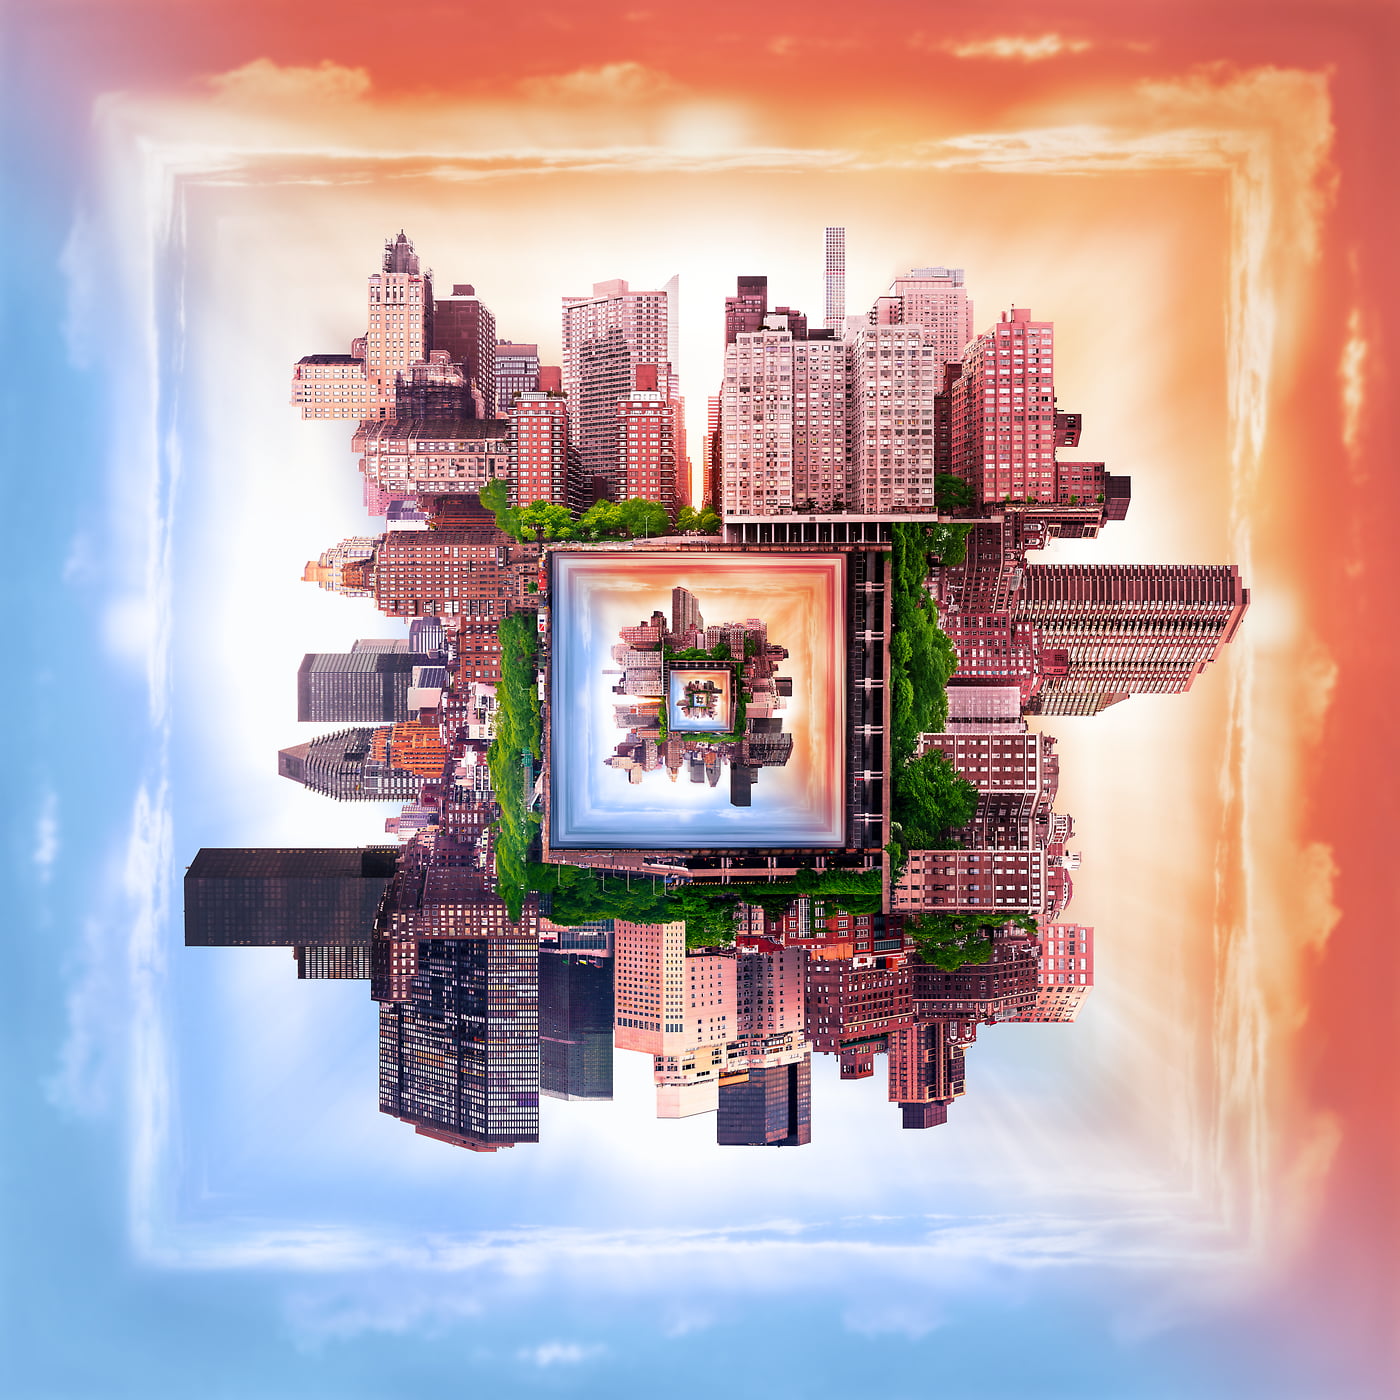 2,204 megapixels! A very high resolution, large-format VAST photo print of a surreal city in a square shape; artistic fine art skyline photo created by Dan Piech in Midtown East, Manhattan, New York City